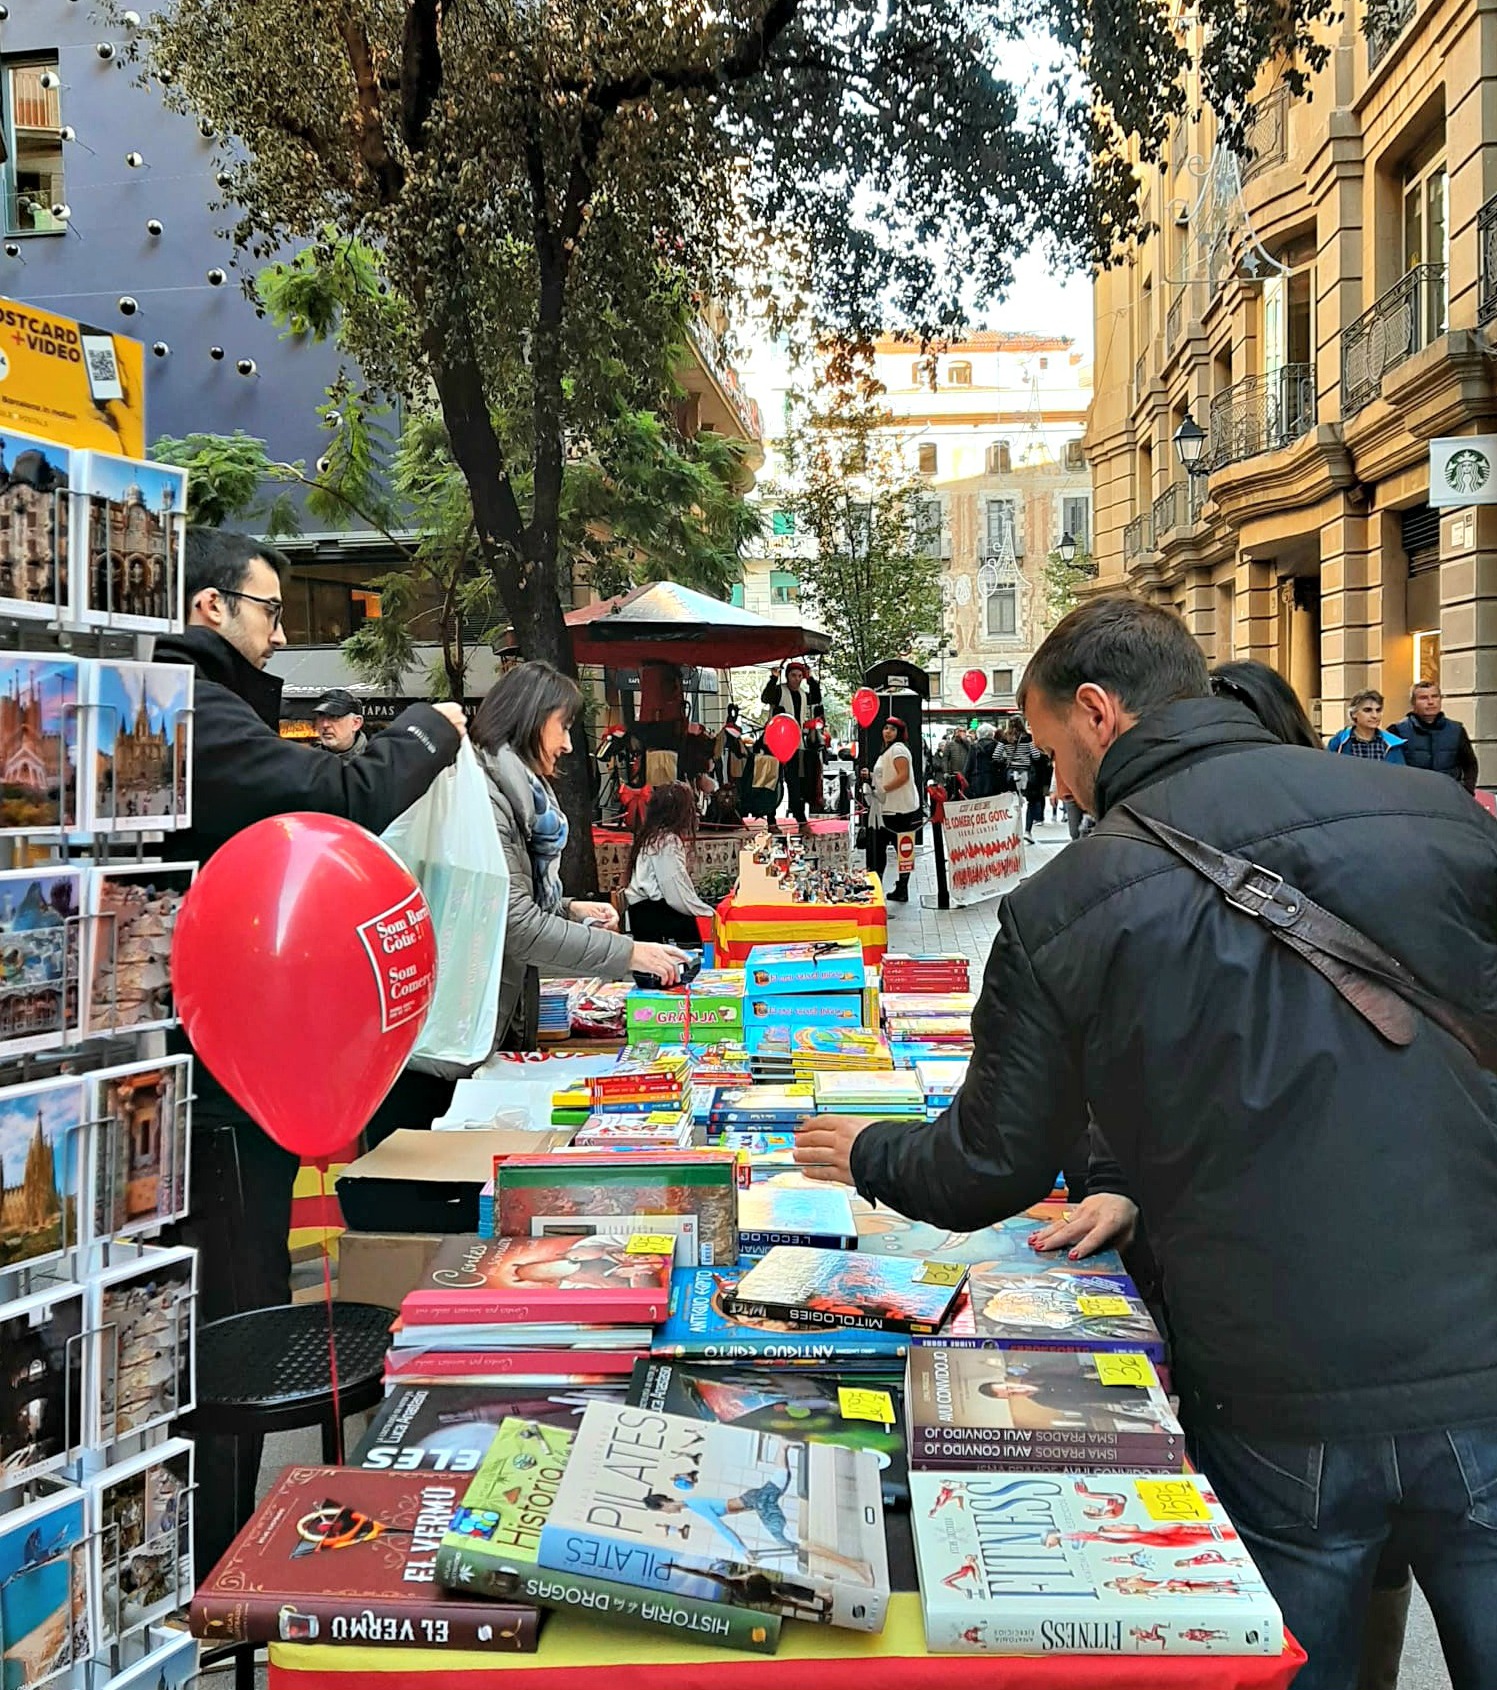 Street Retail Days 2019: Trade approaches the customer!